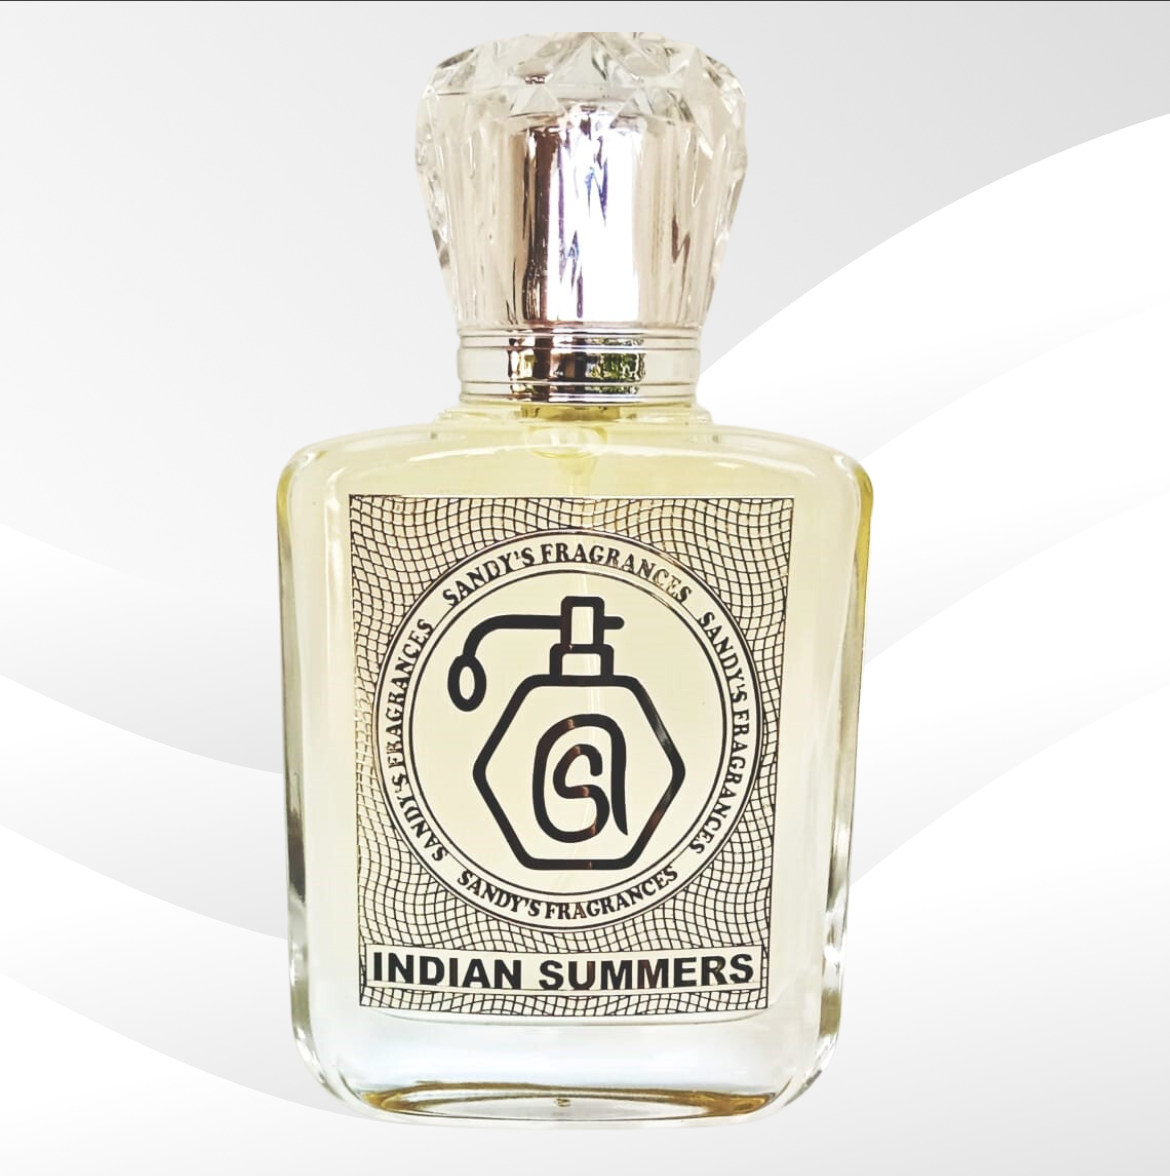 Indian summers Best Fruity fragrance